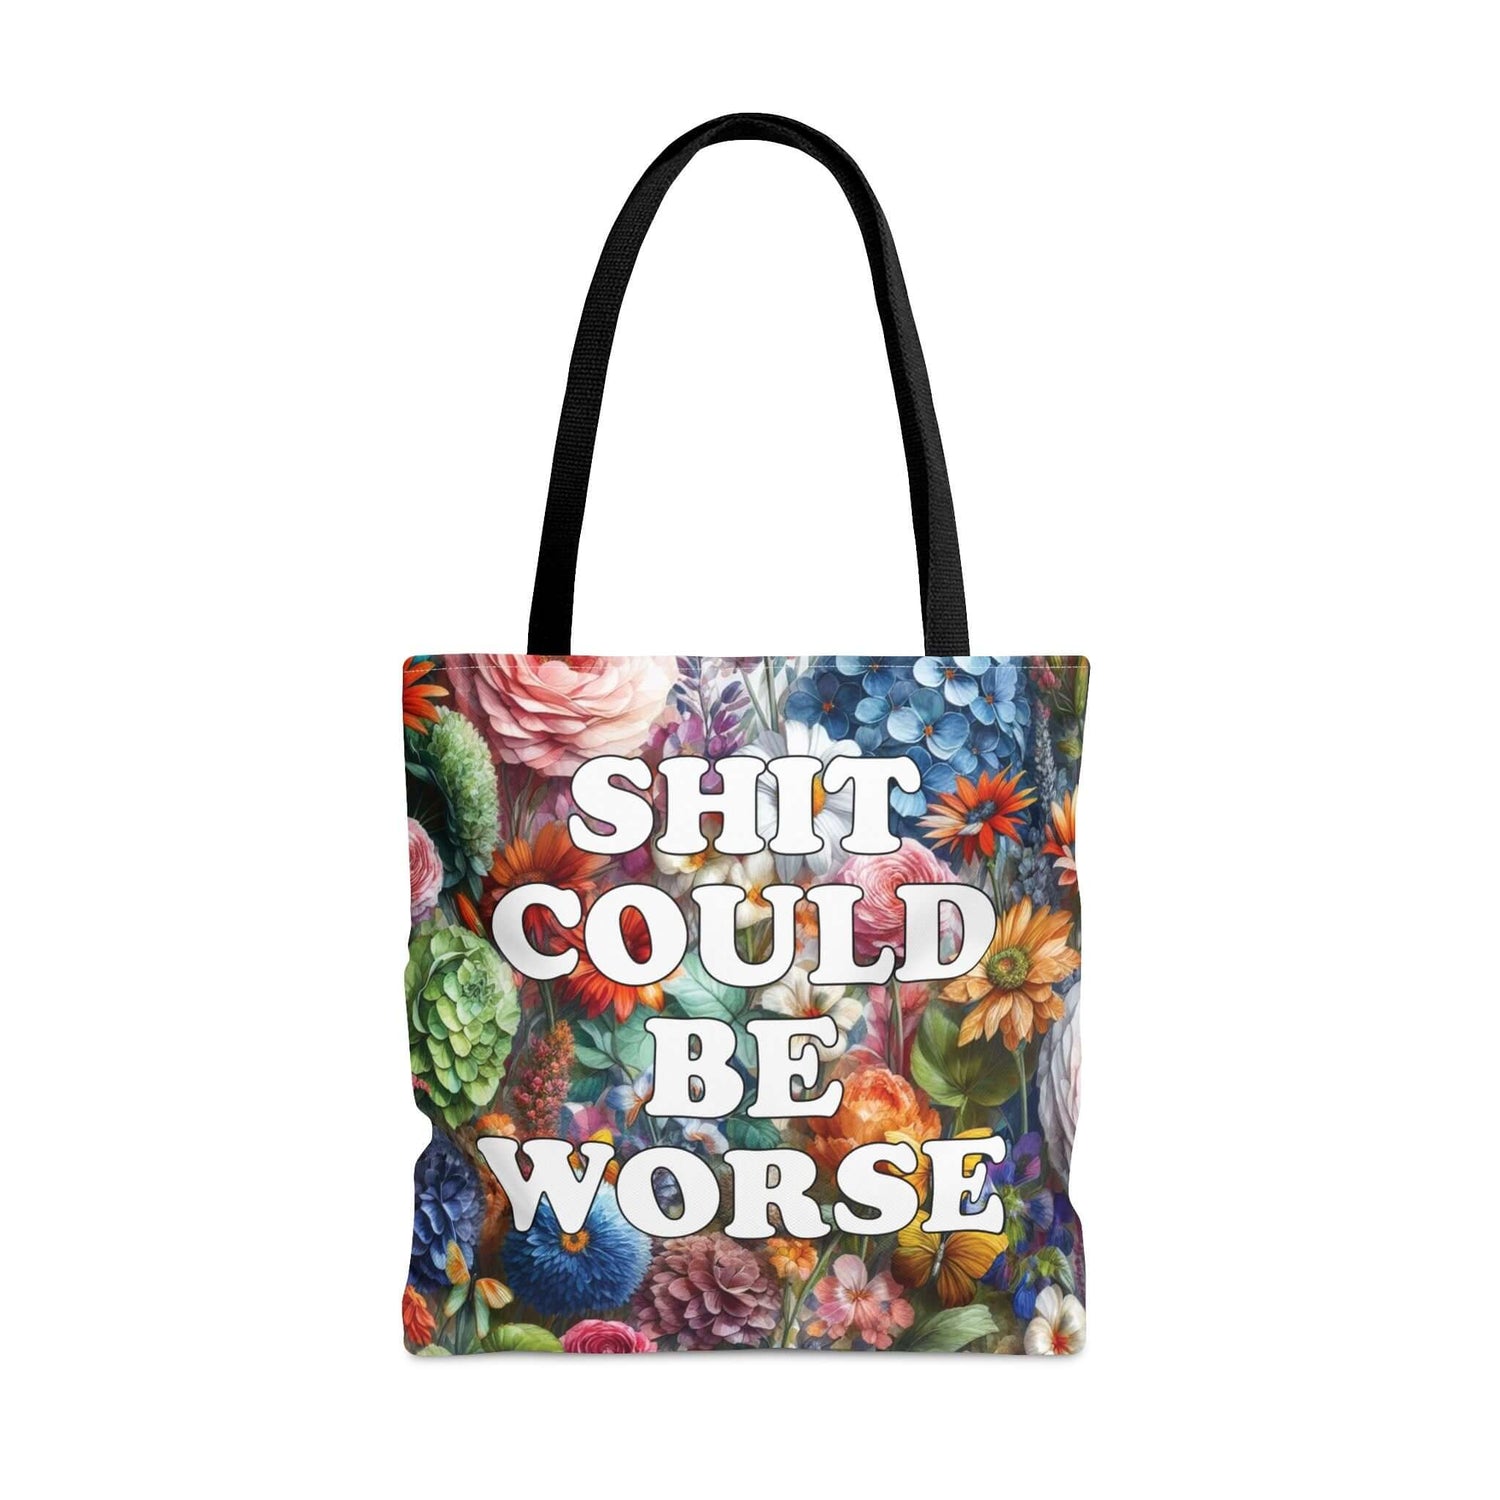 Witticisms r us Tote bag with floral background and the words "Shit could be worse" printed on both sides